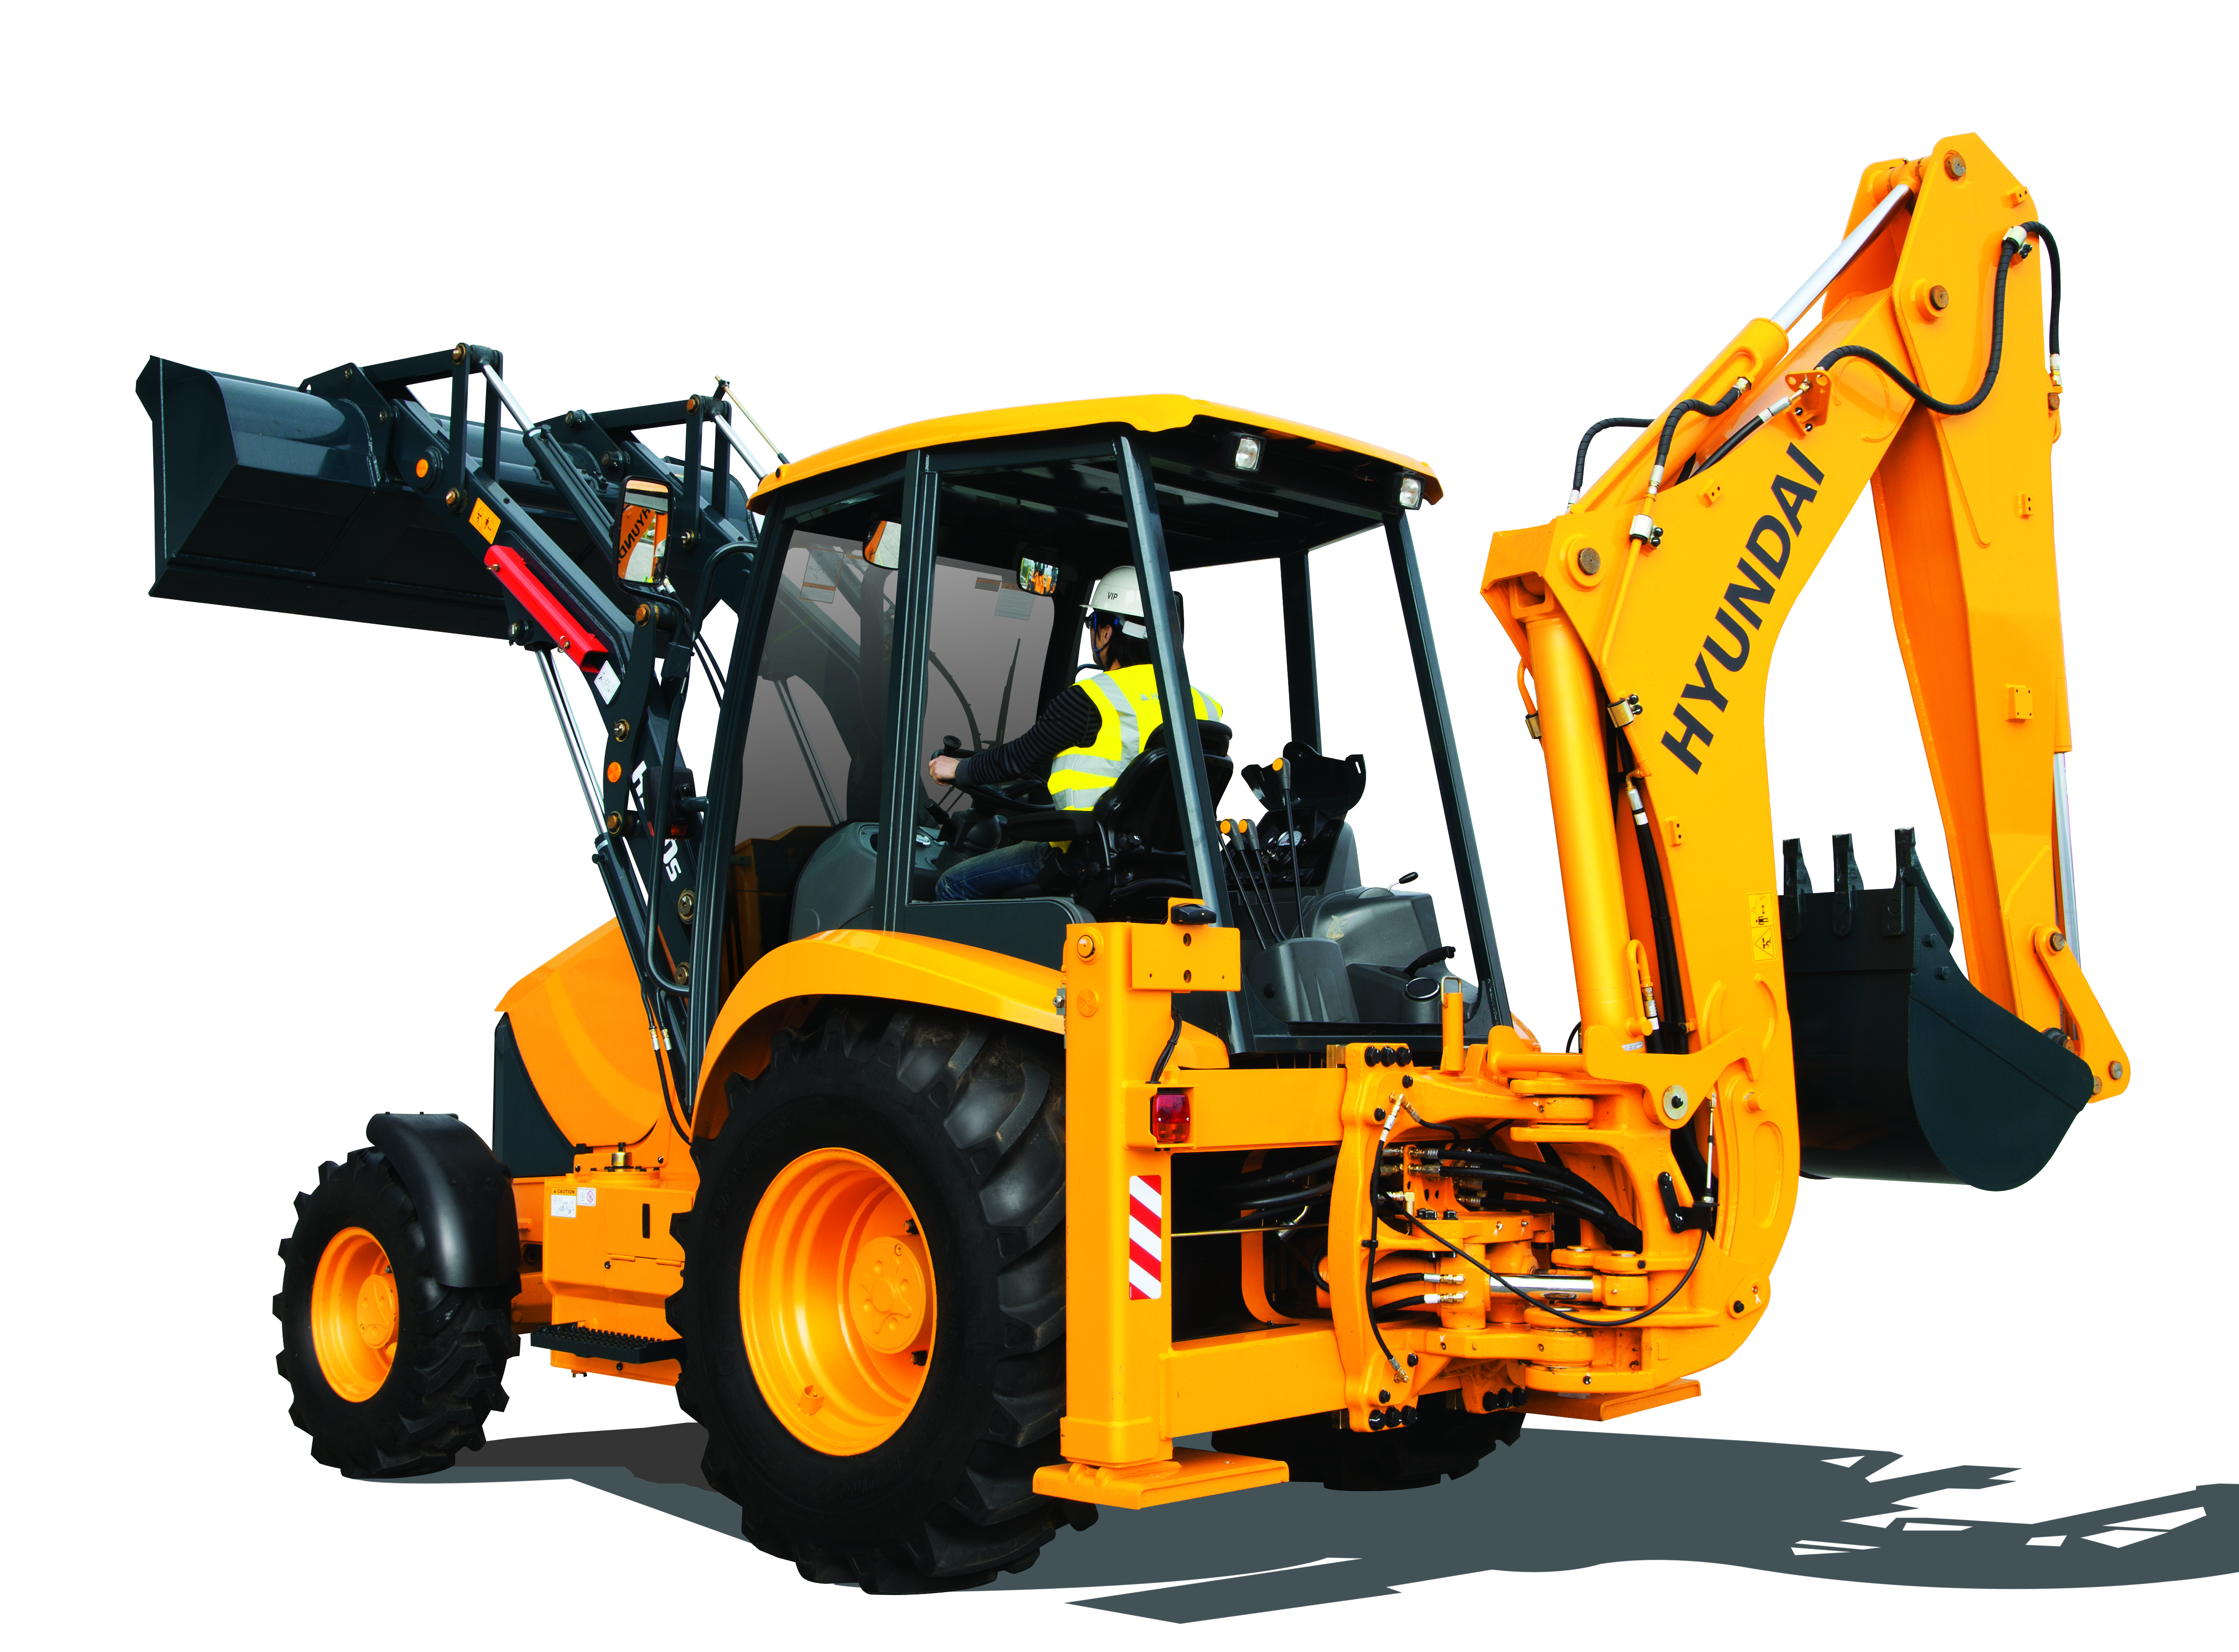 Global launch of new Hyundai backhoe loader range takes place in SA ...